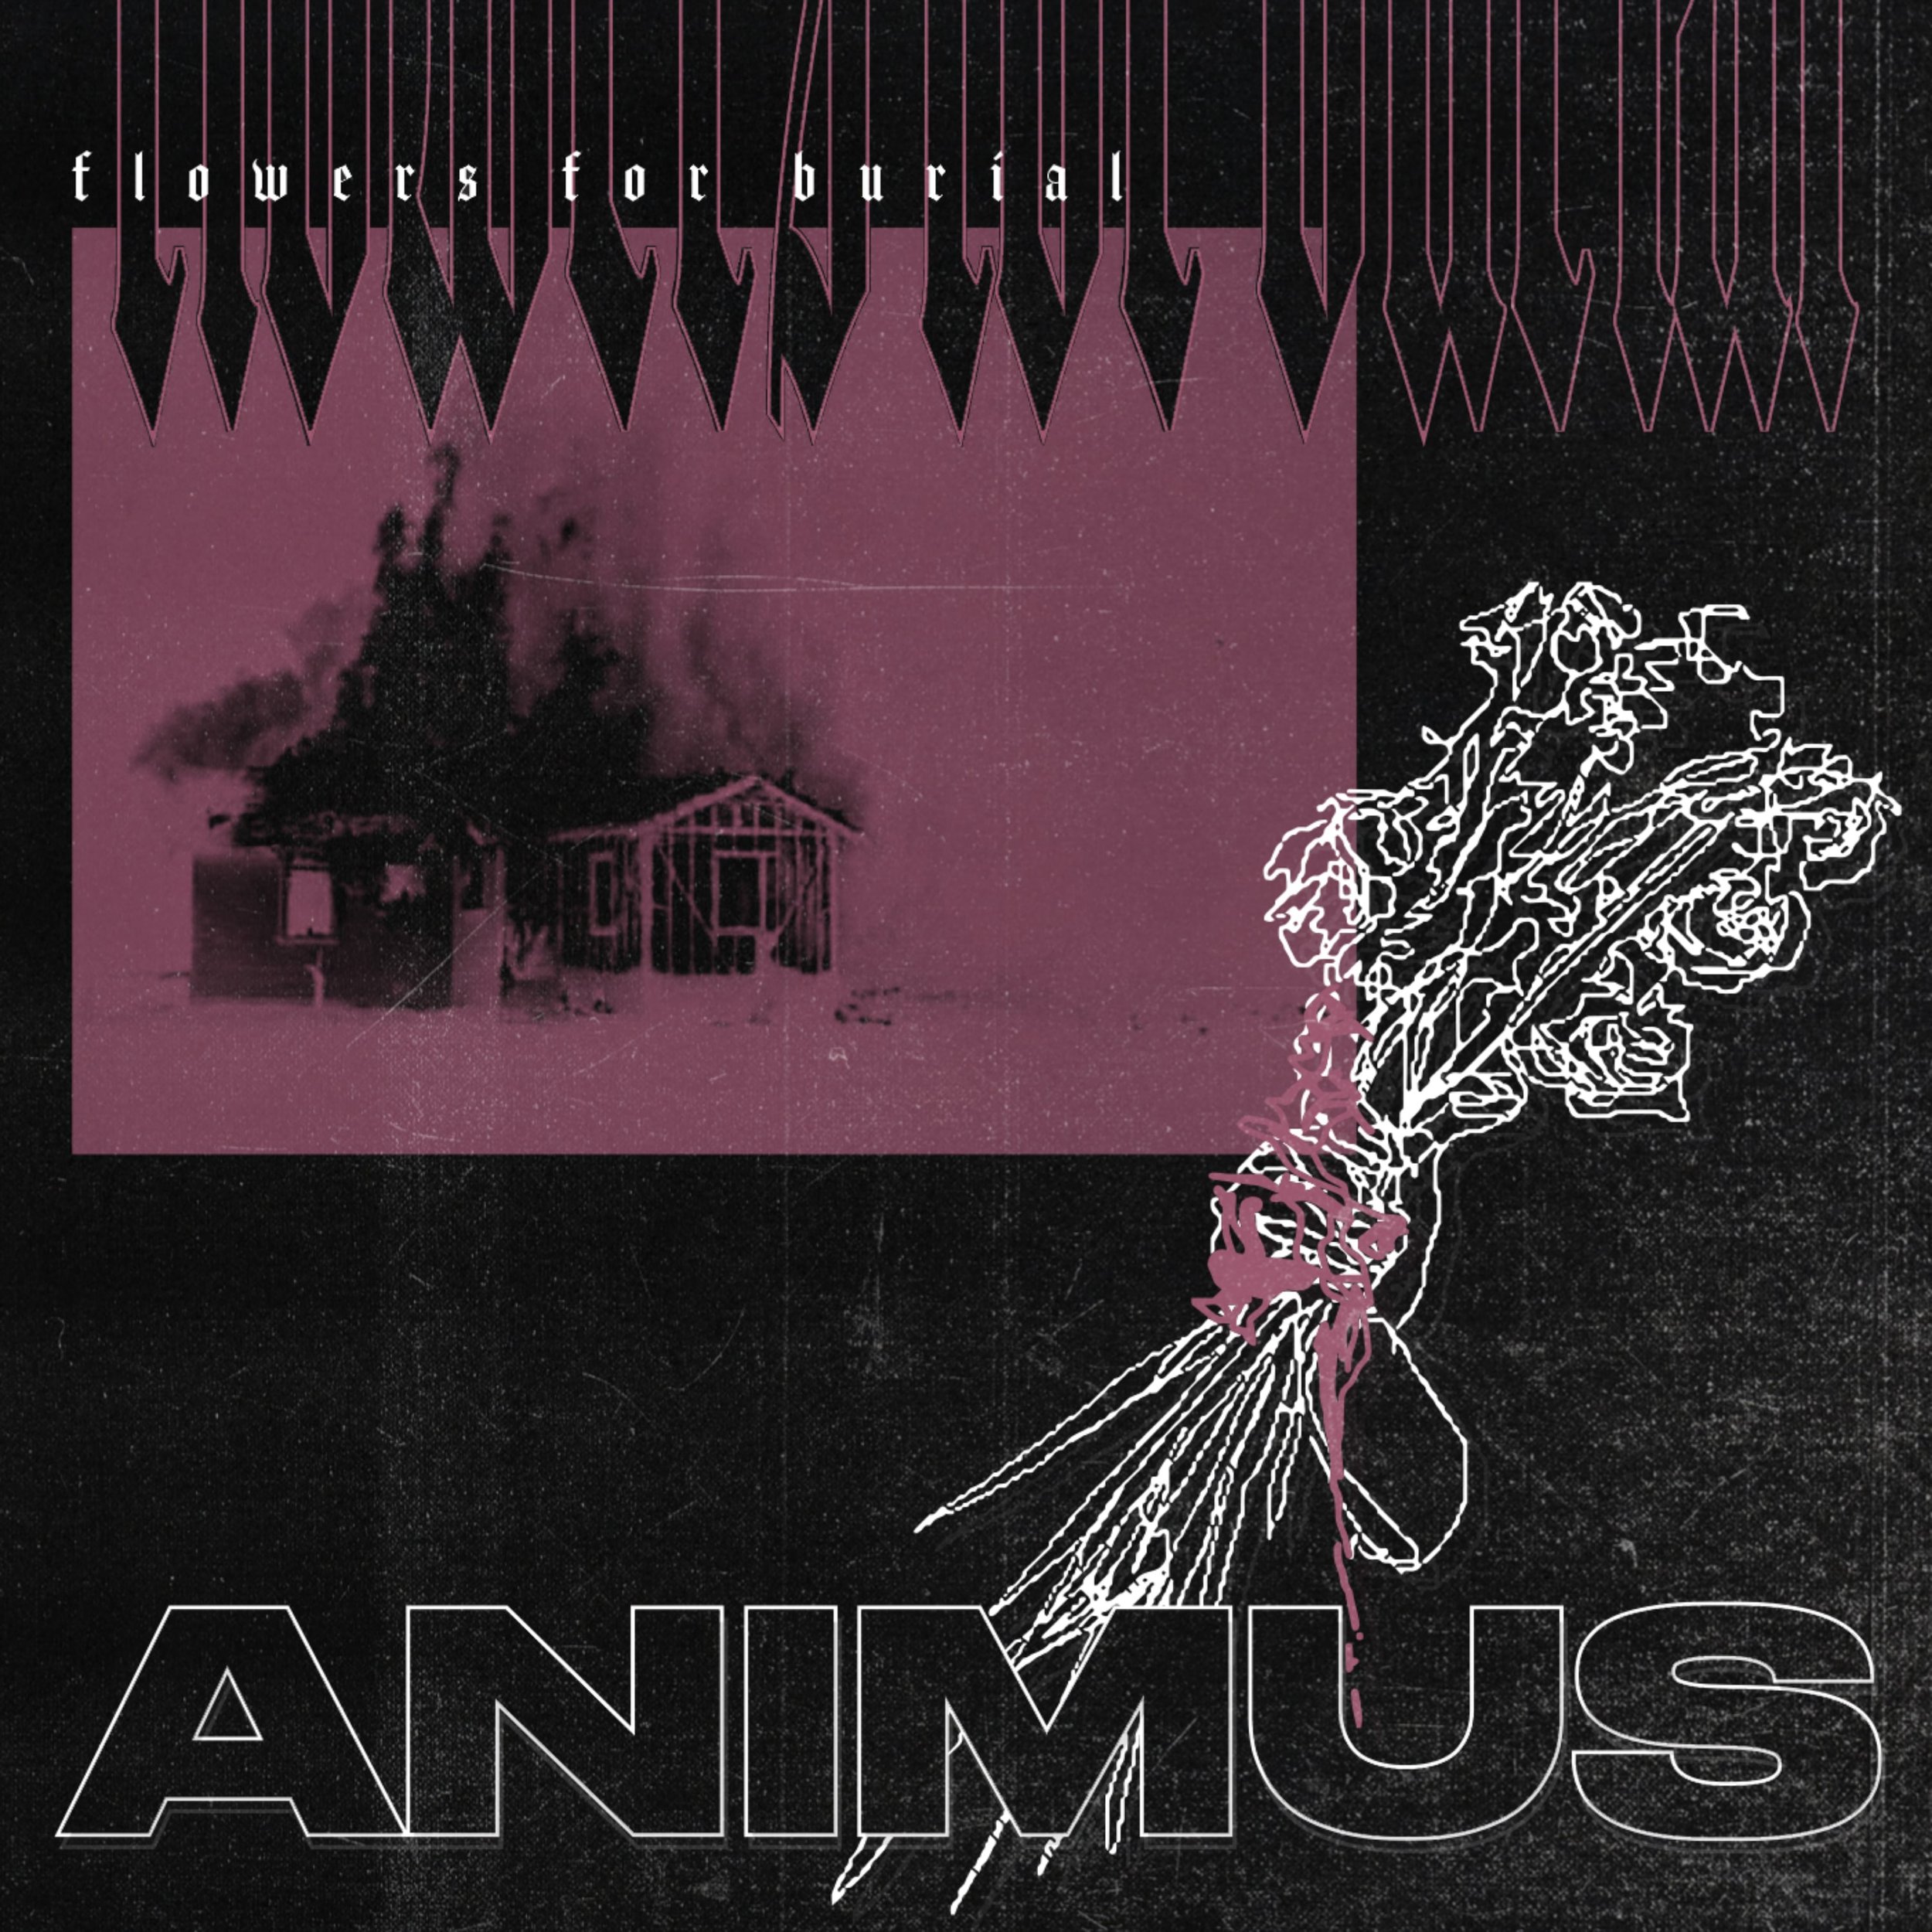 Flowers for Burial - Animus - Cover.jpg